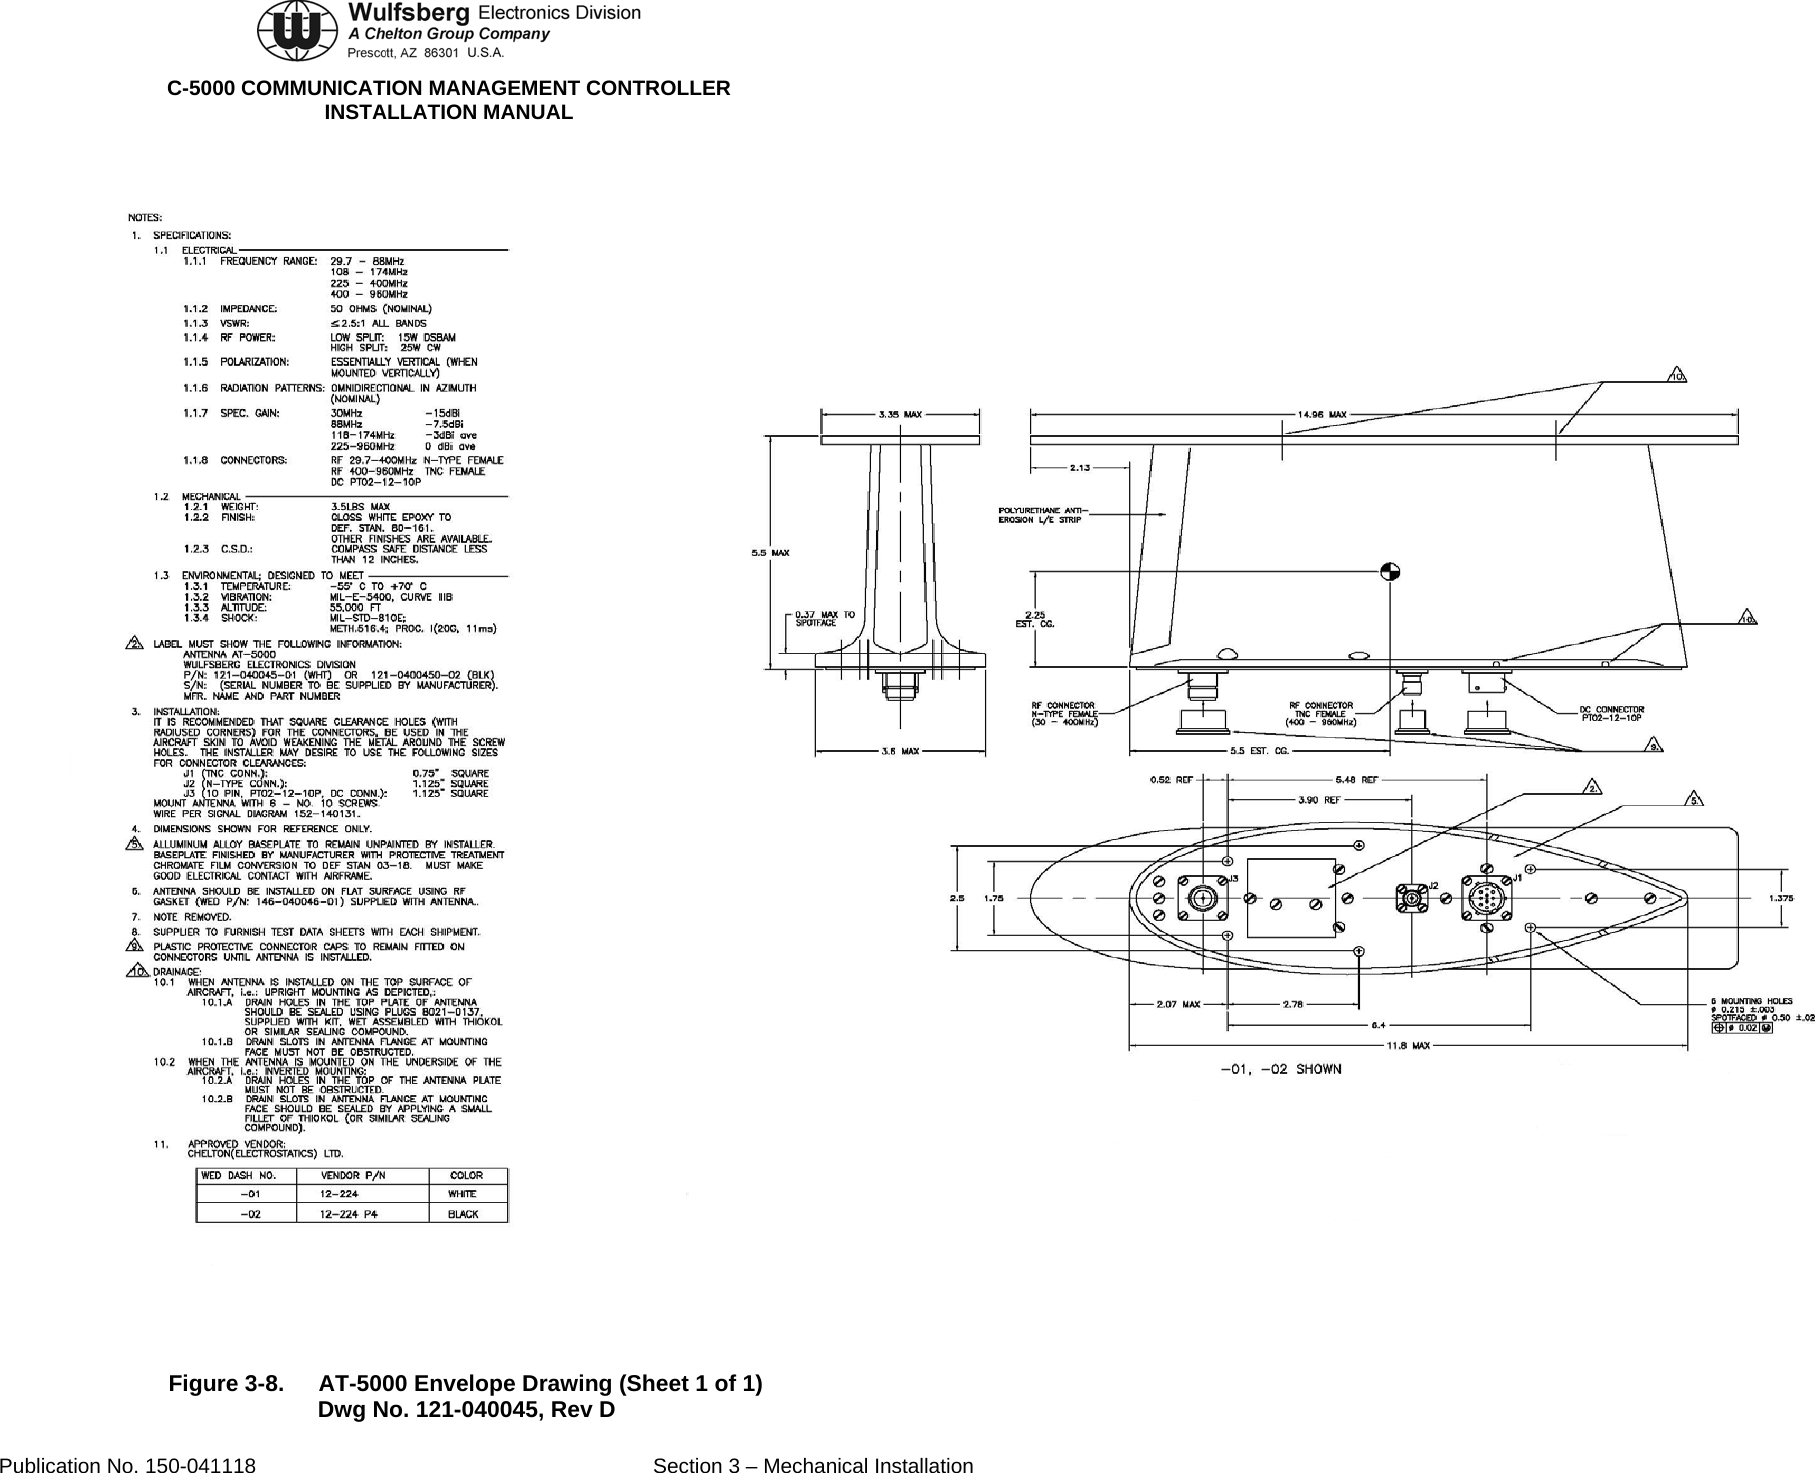  C-5000 COMMUNICATION MANAGEMENT CONTROLLER INSTALLATION MANUAL Publication No. 150-041118  Section 3 – Mechanical Installation  Figure 3-8.  AT-5000 Envelope Drawing (Sheet 1 of 1) Dwg No. 121-040045, Rev D  